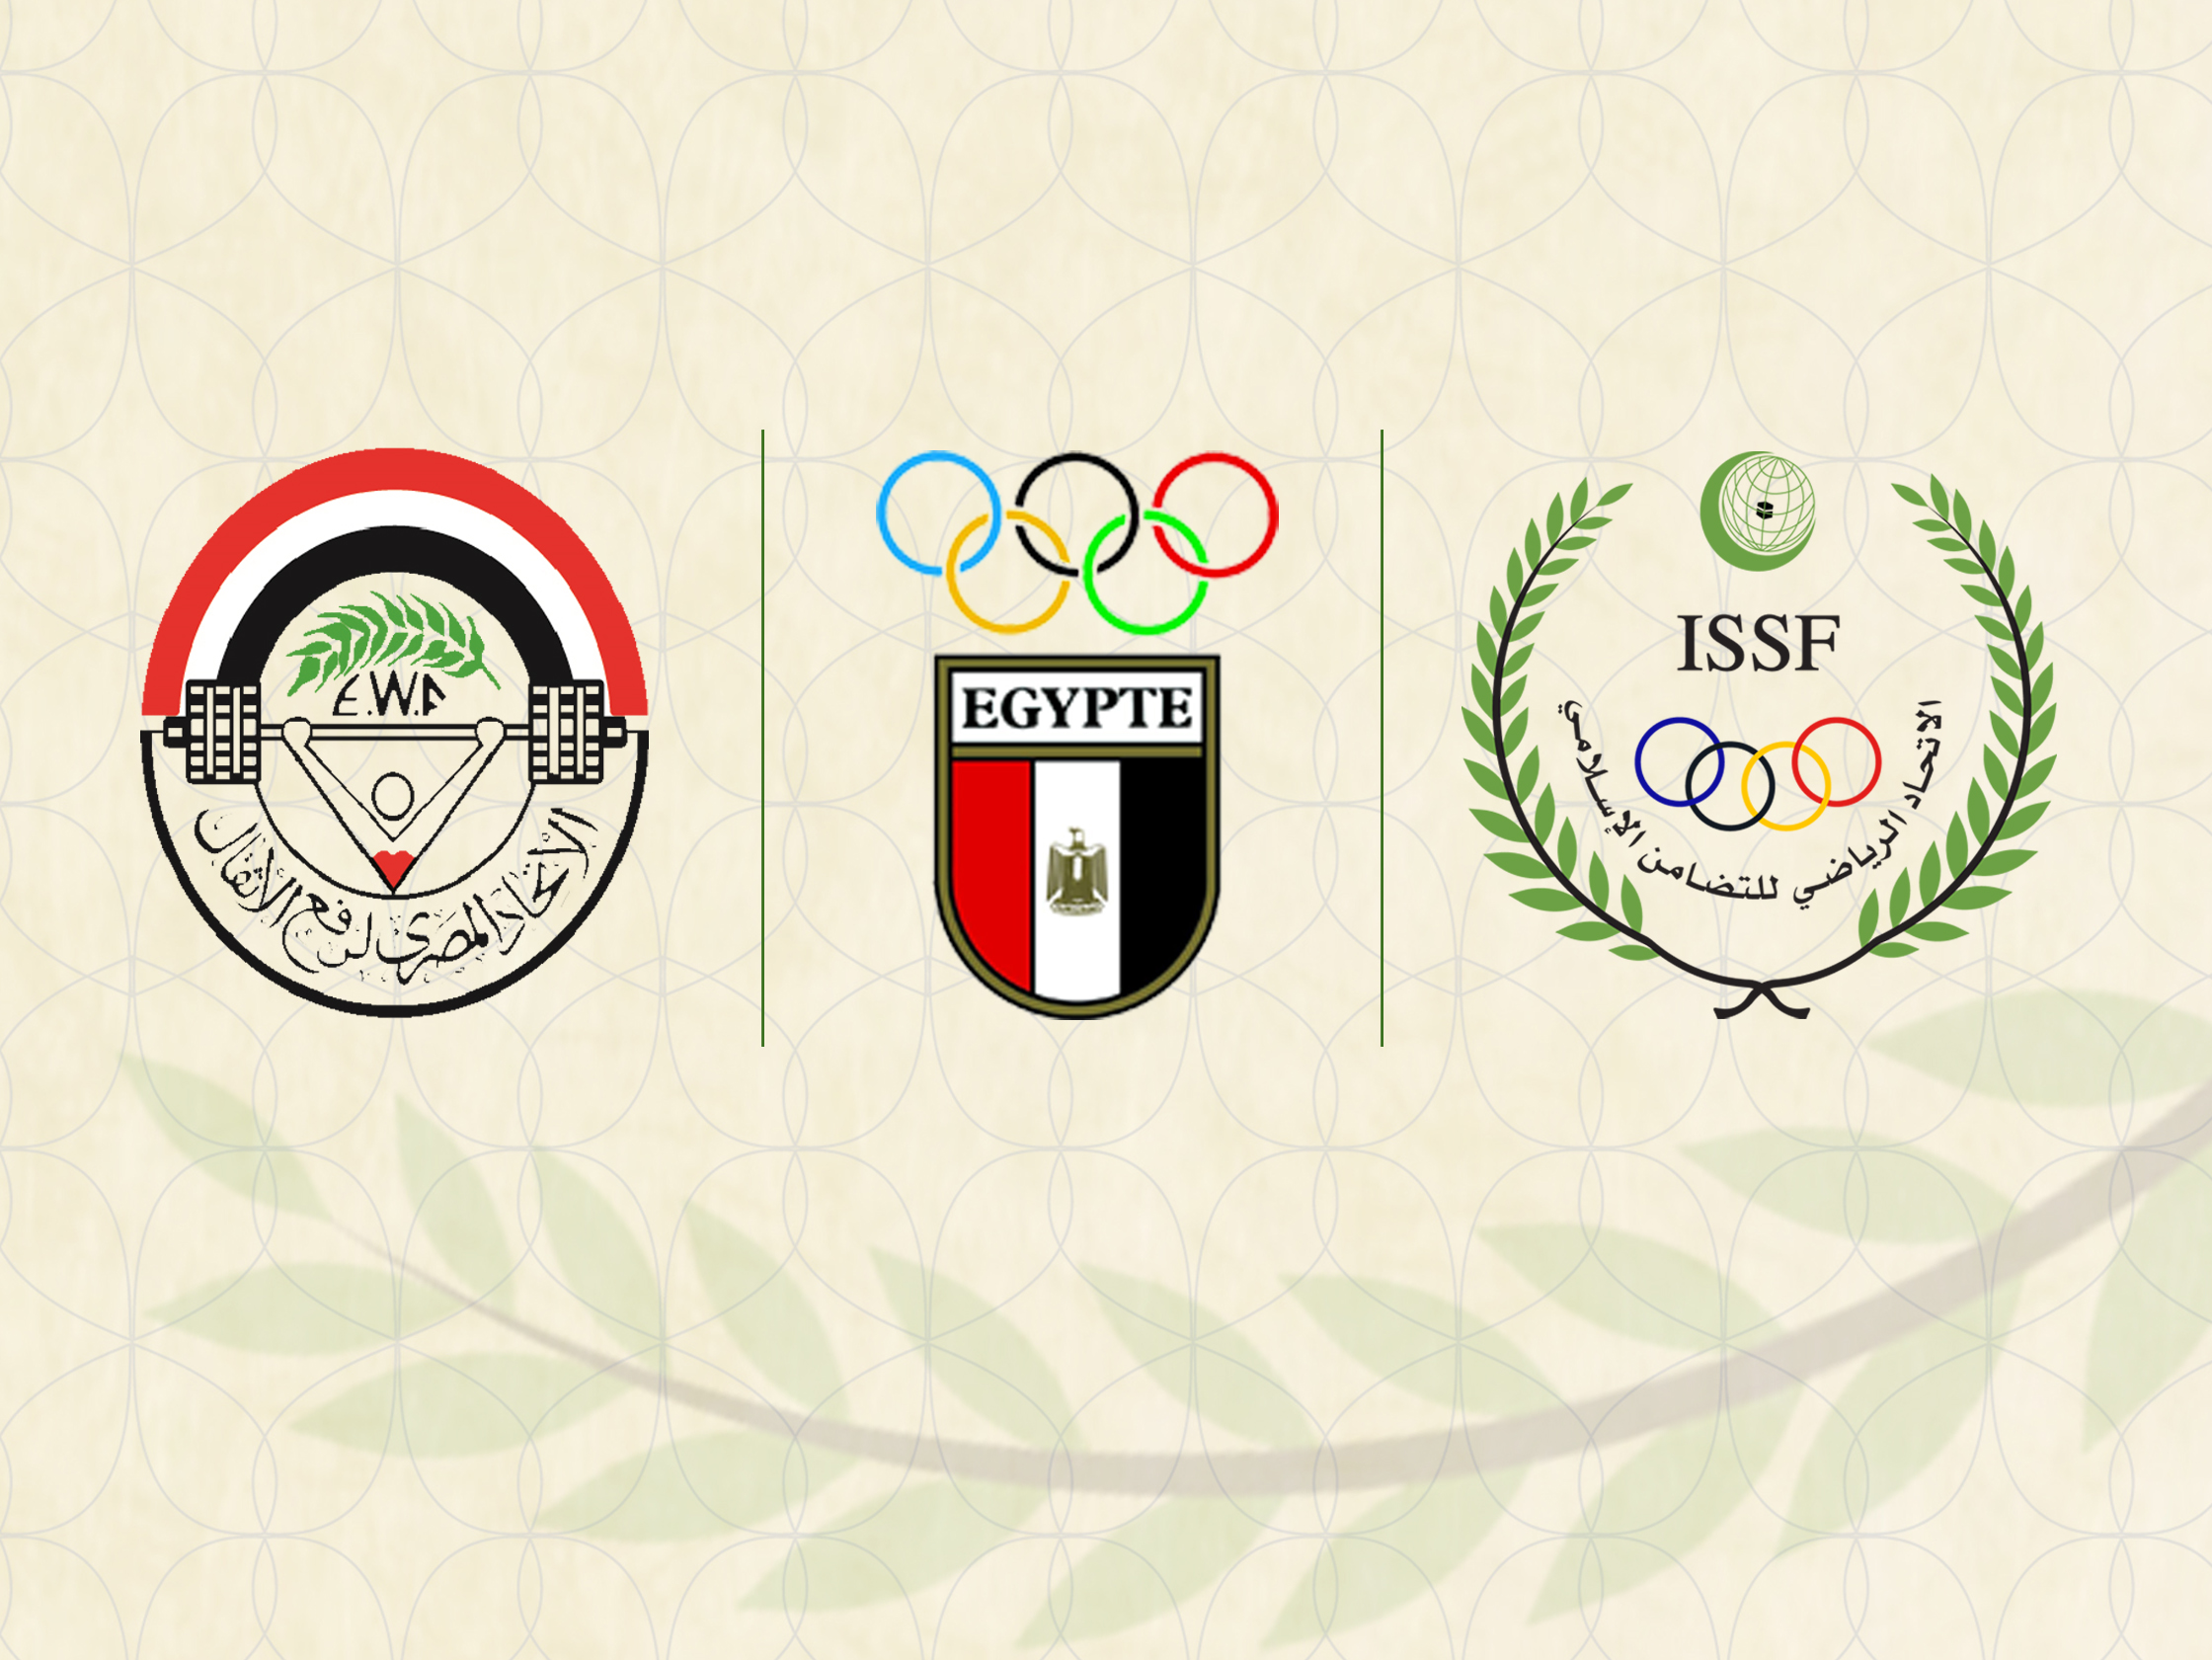  ISSF organizes the 5th International Solidarity Weightlifting Championships in Egypt